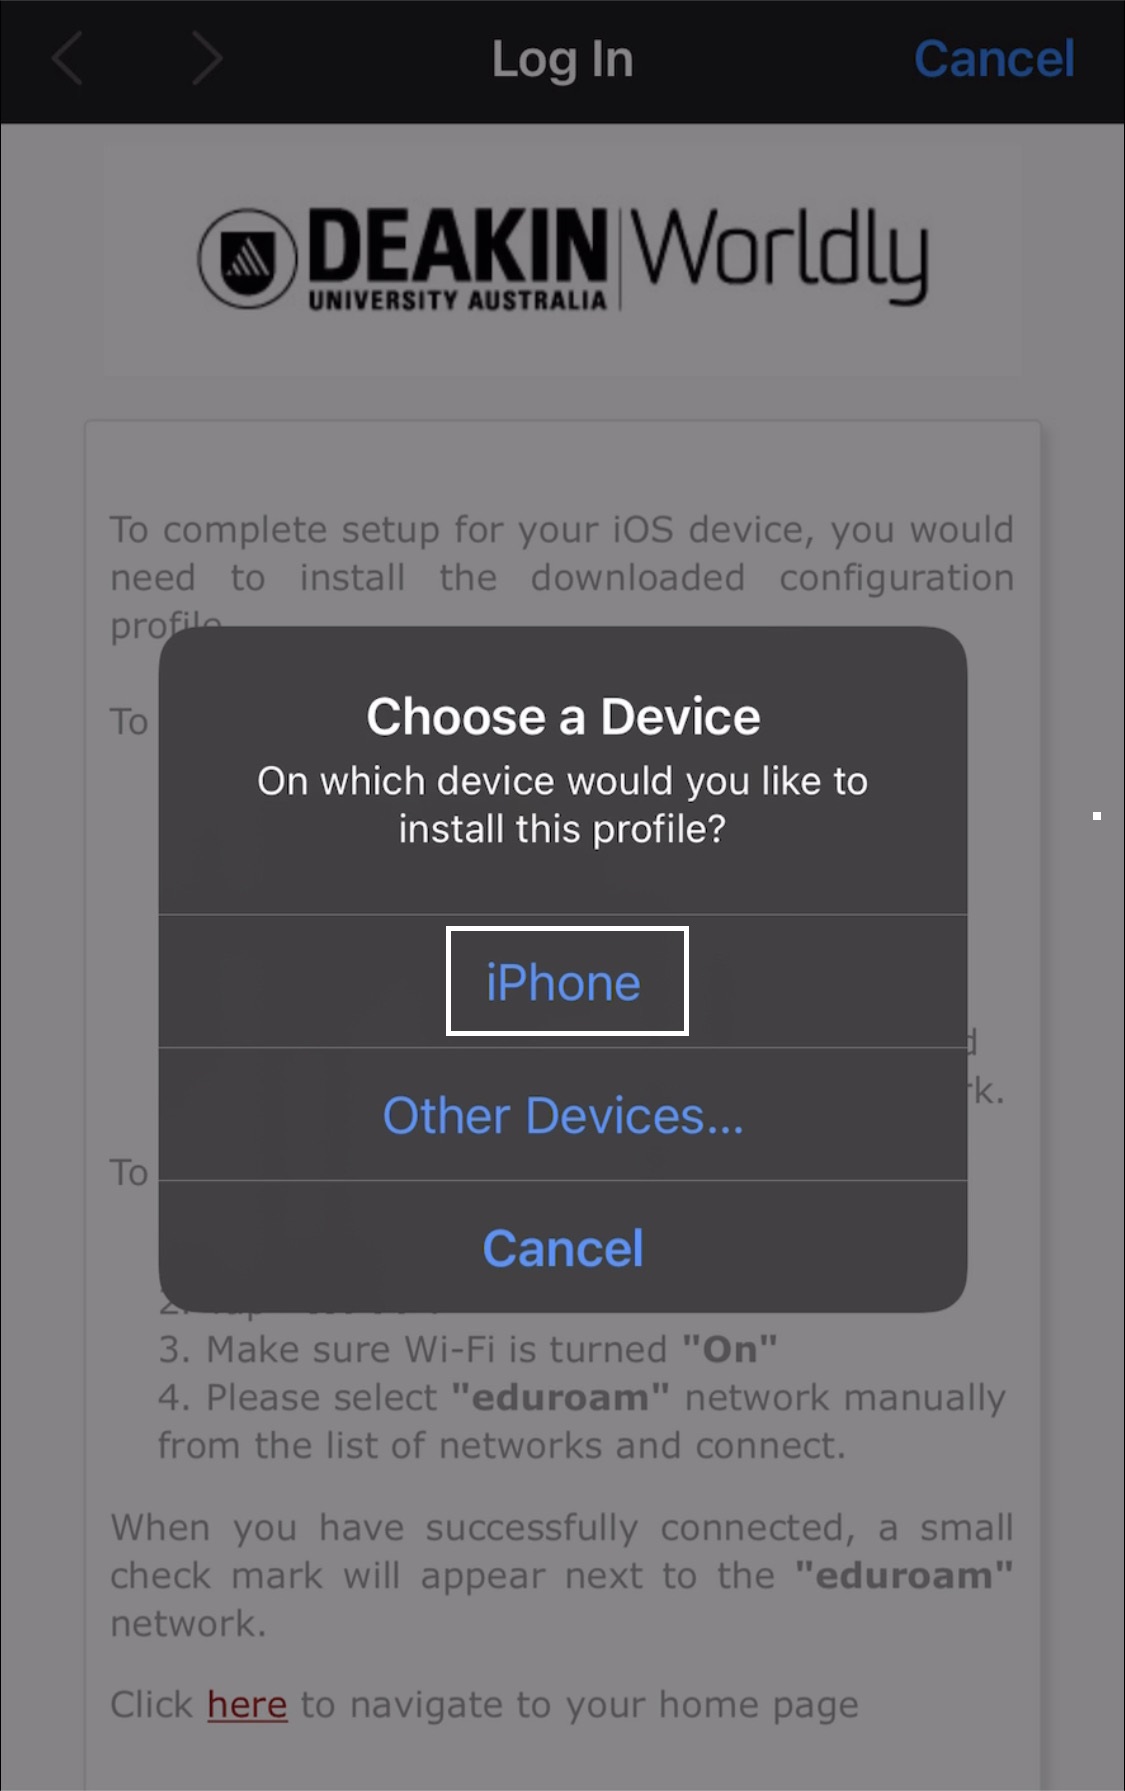 Choose a Device popup with iPhone selection outlined in white